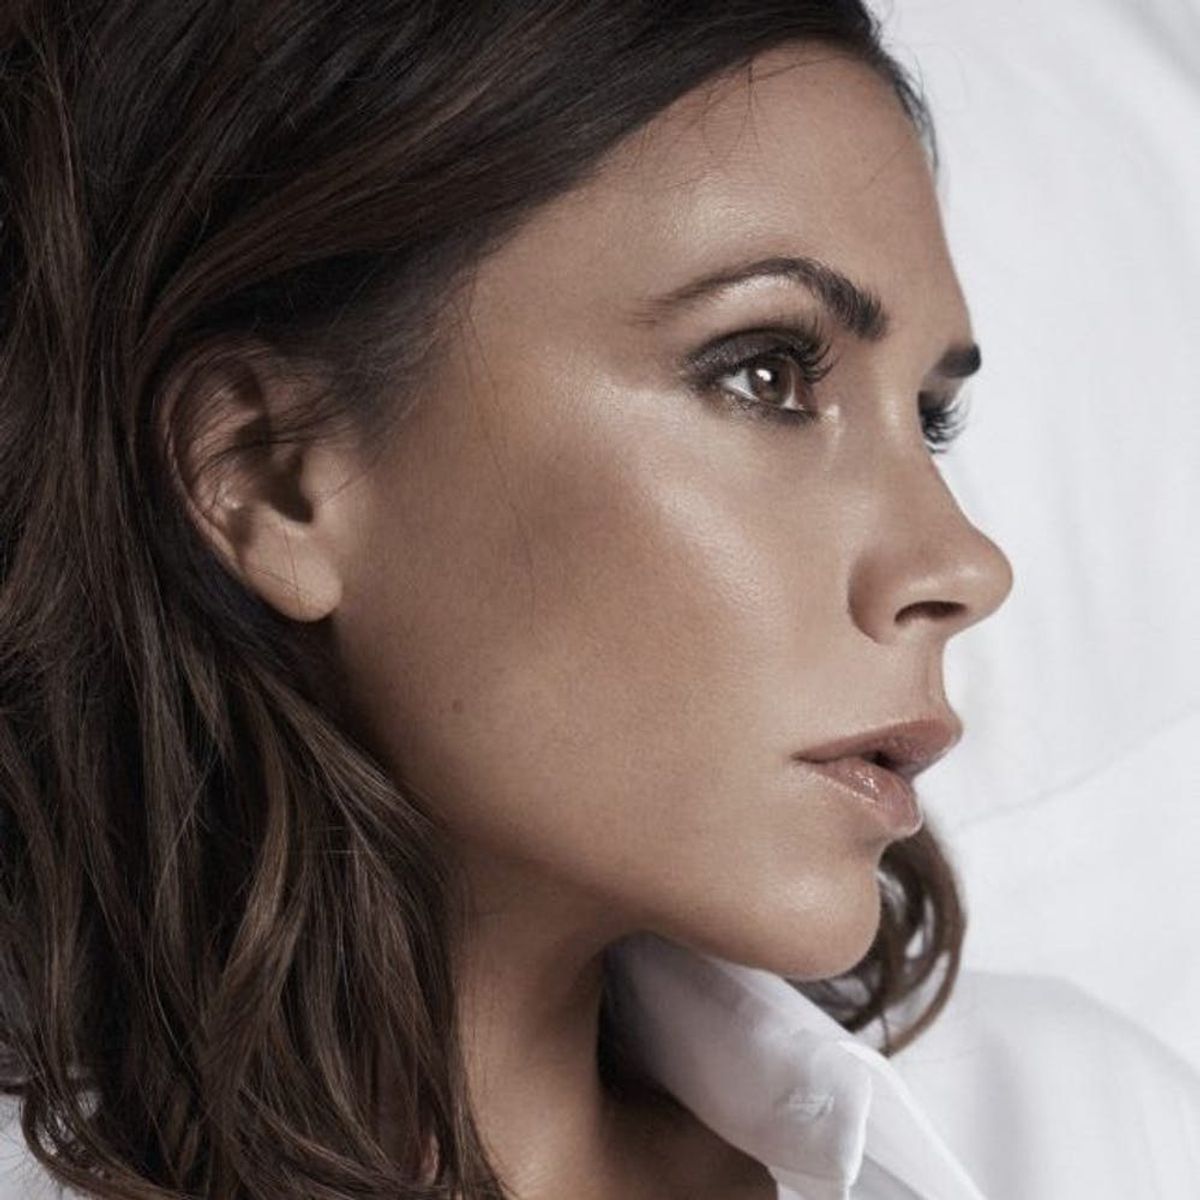 Victoria Beckham’s Latest Estee Lauder Makeup Line Is All About “Sweaty-Sexy Skin”